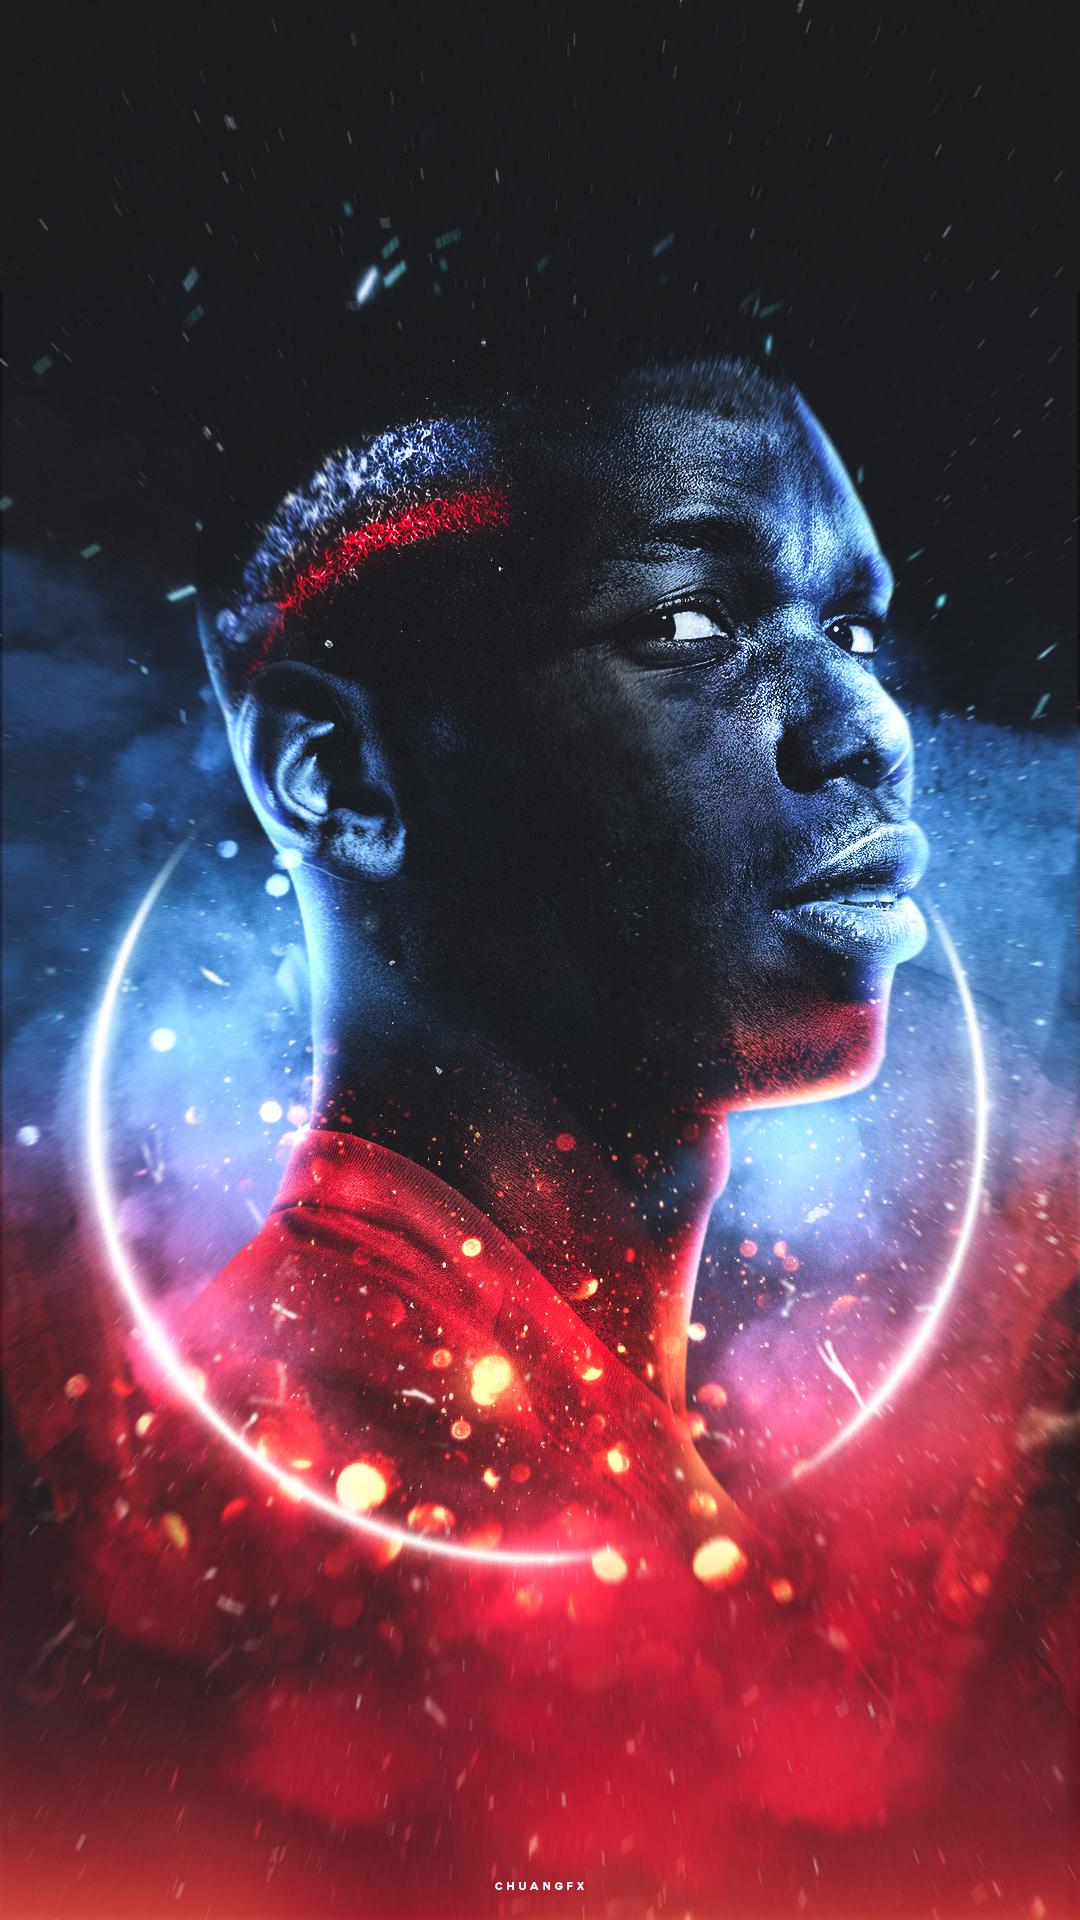 paul pogba wallpaper,illustration,fictional character,poster,space,graphic design